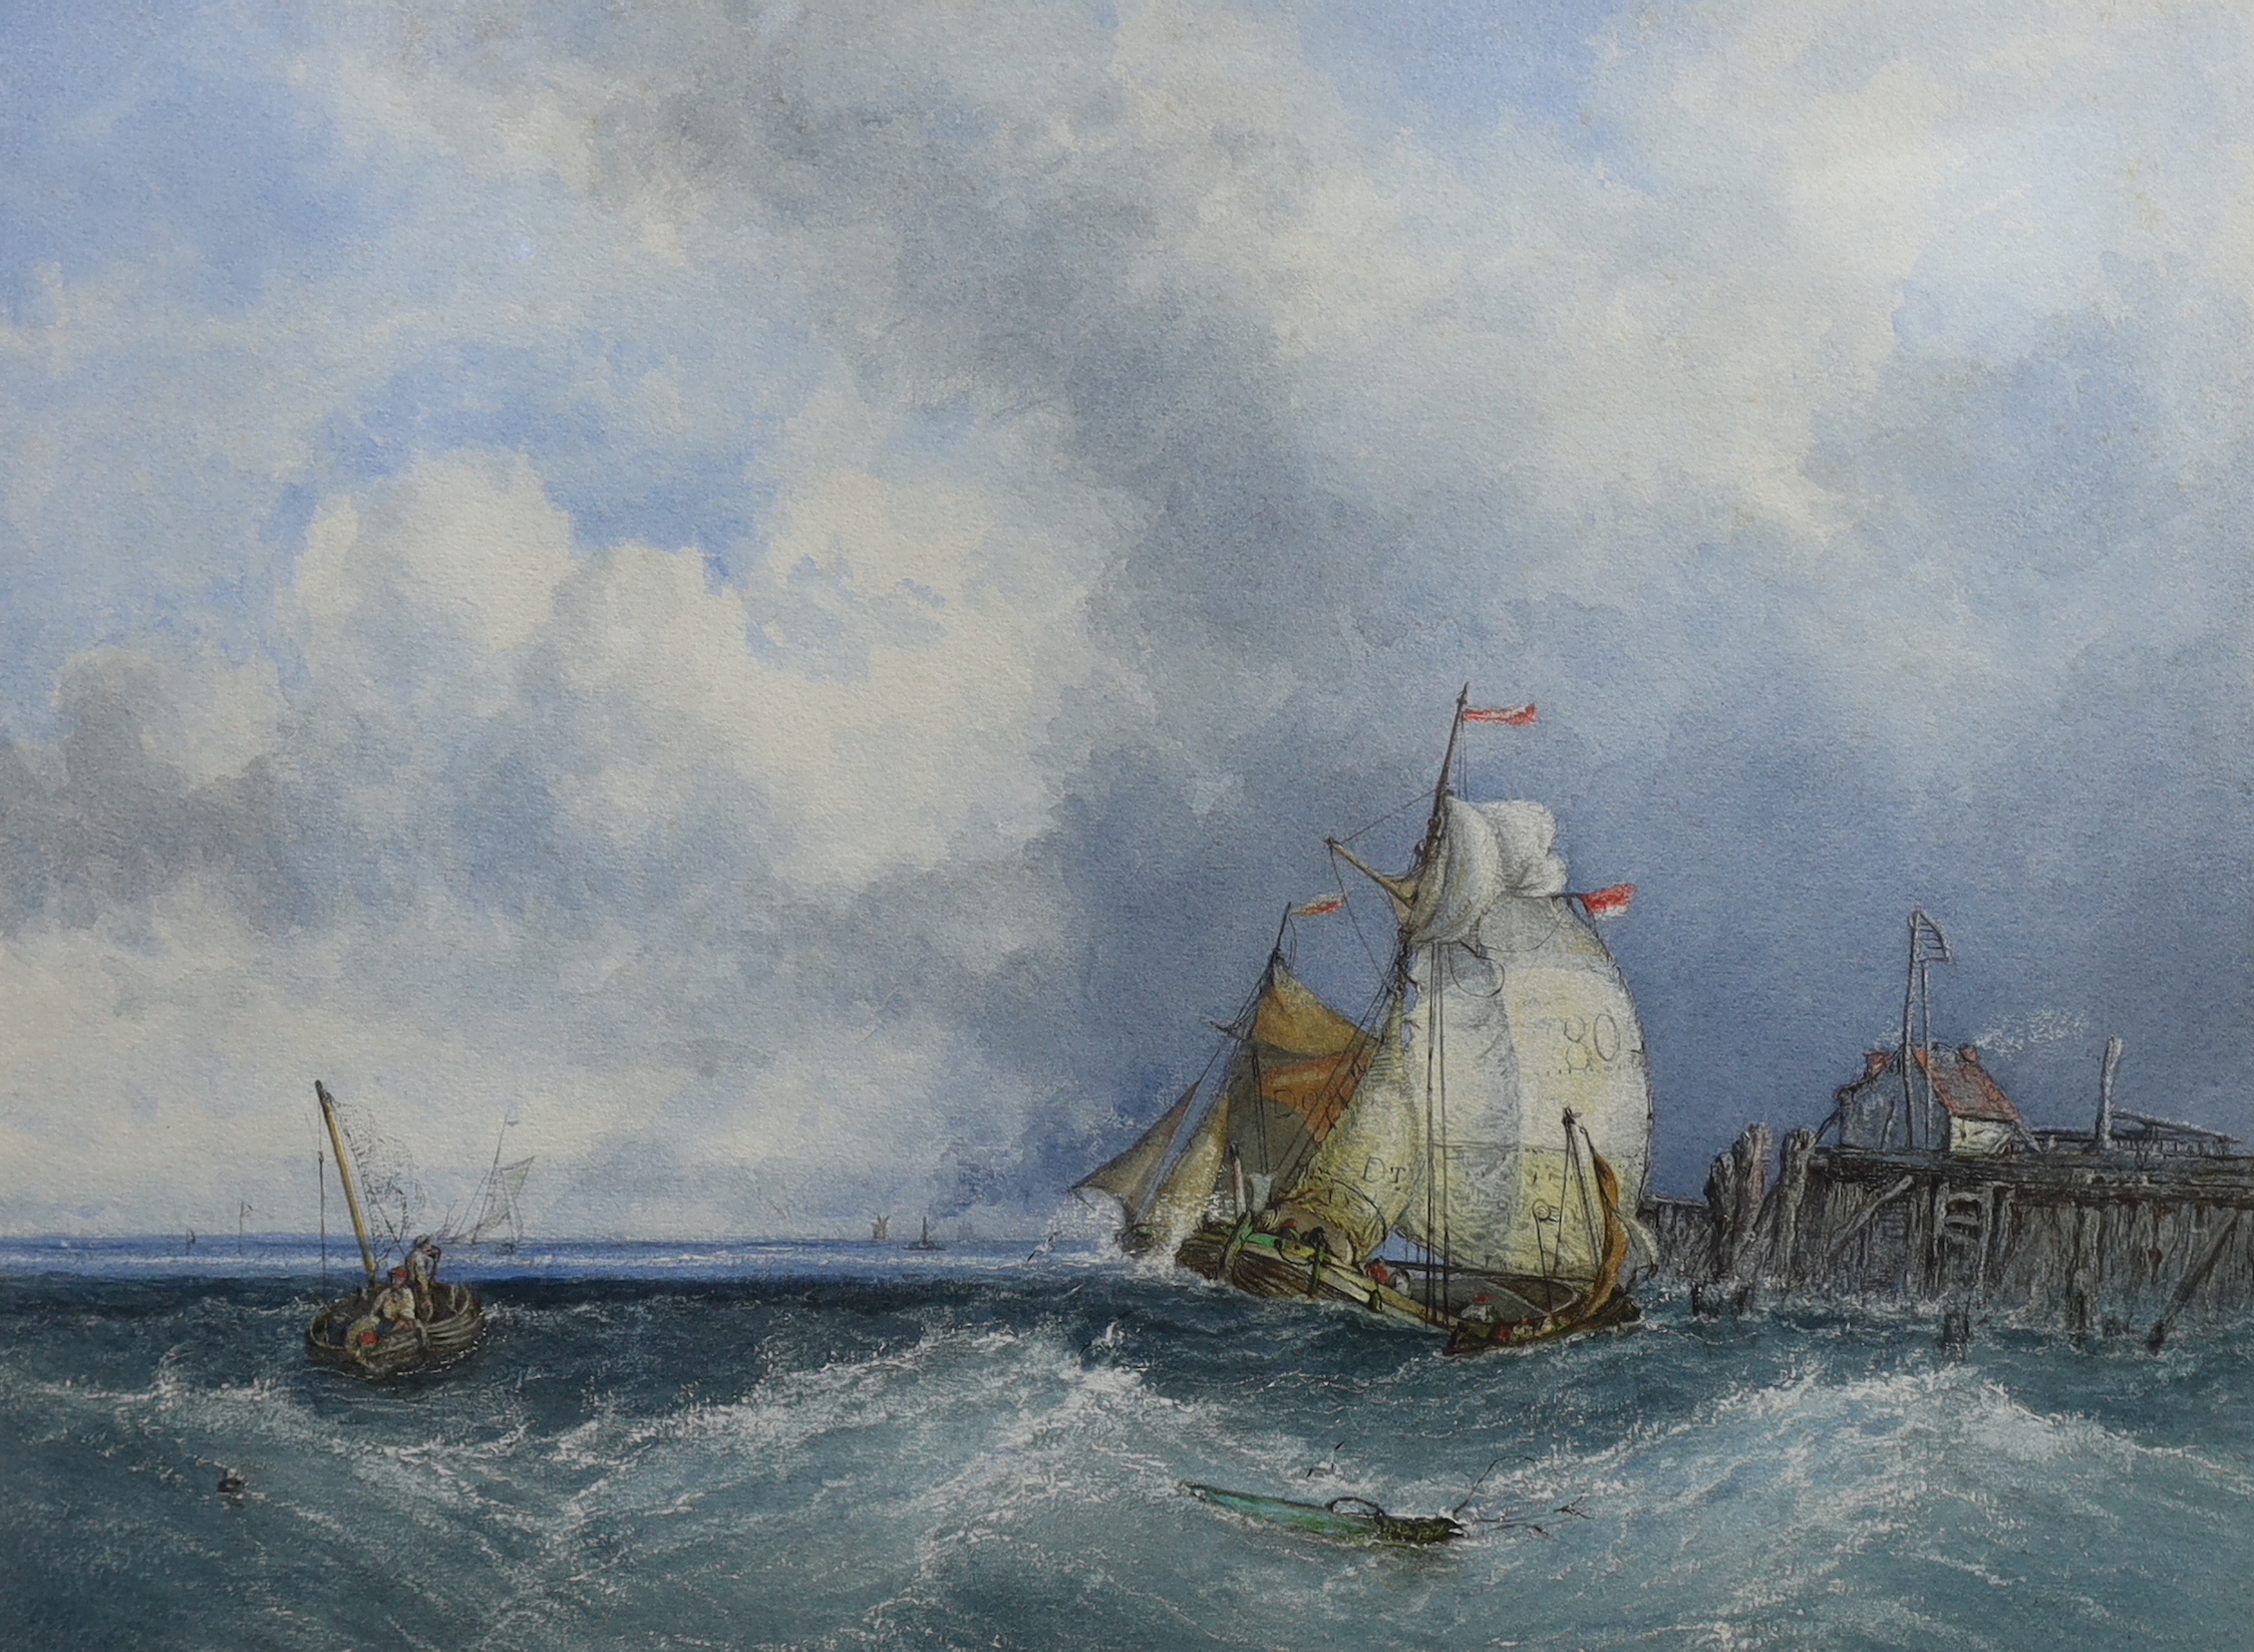 James Webb (English, 1825-1895), 'Off Dunkerque', watercolour, 35 x 47cm, housed in a later frame but with the original frame and label retained